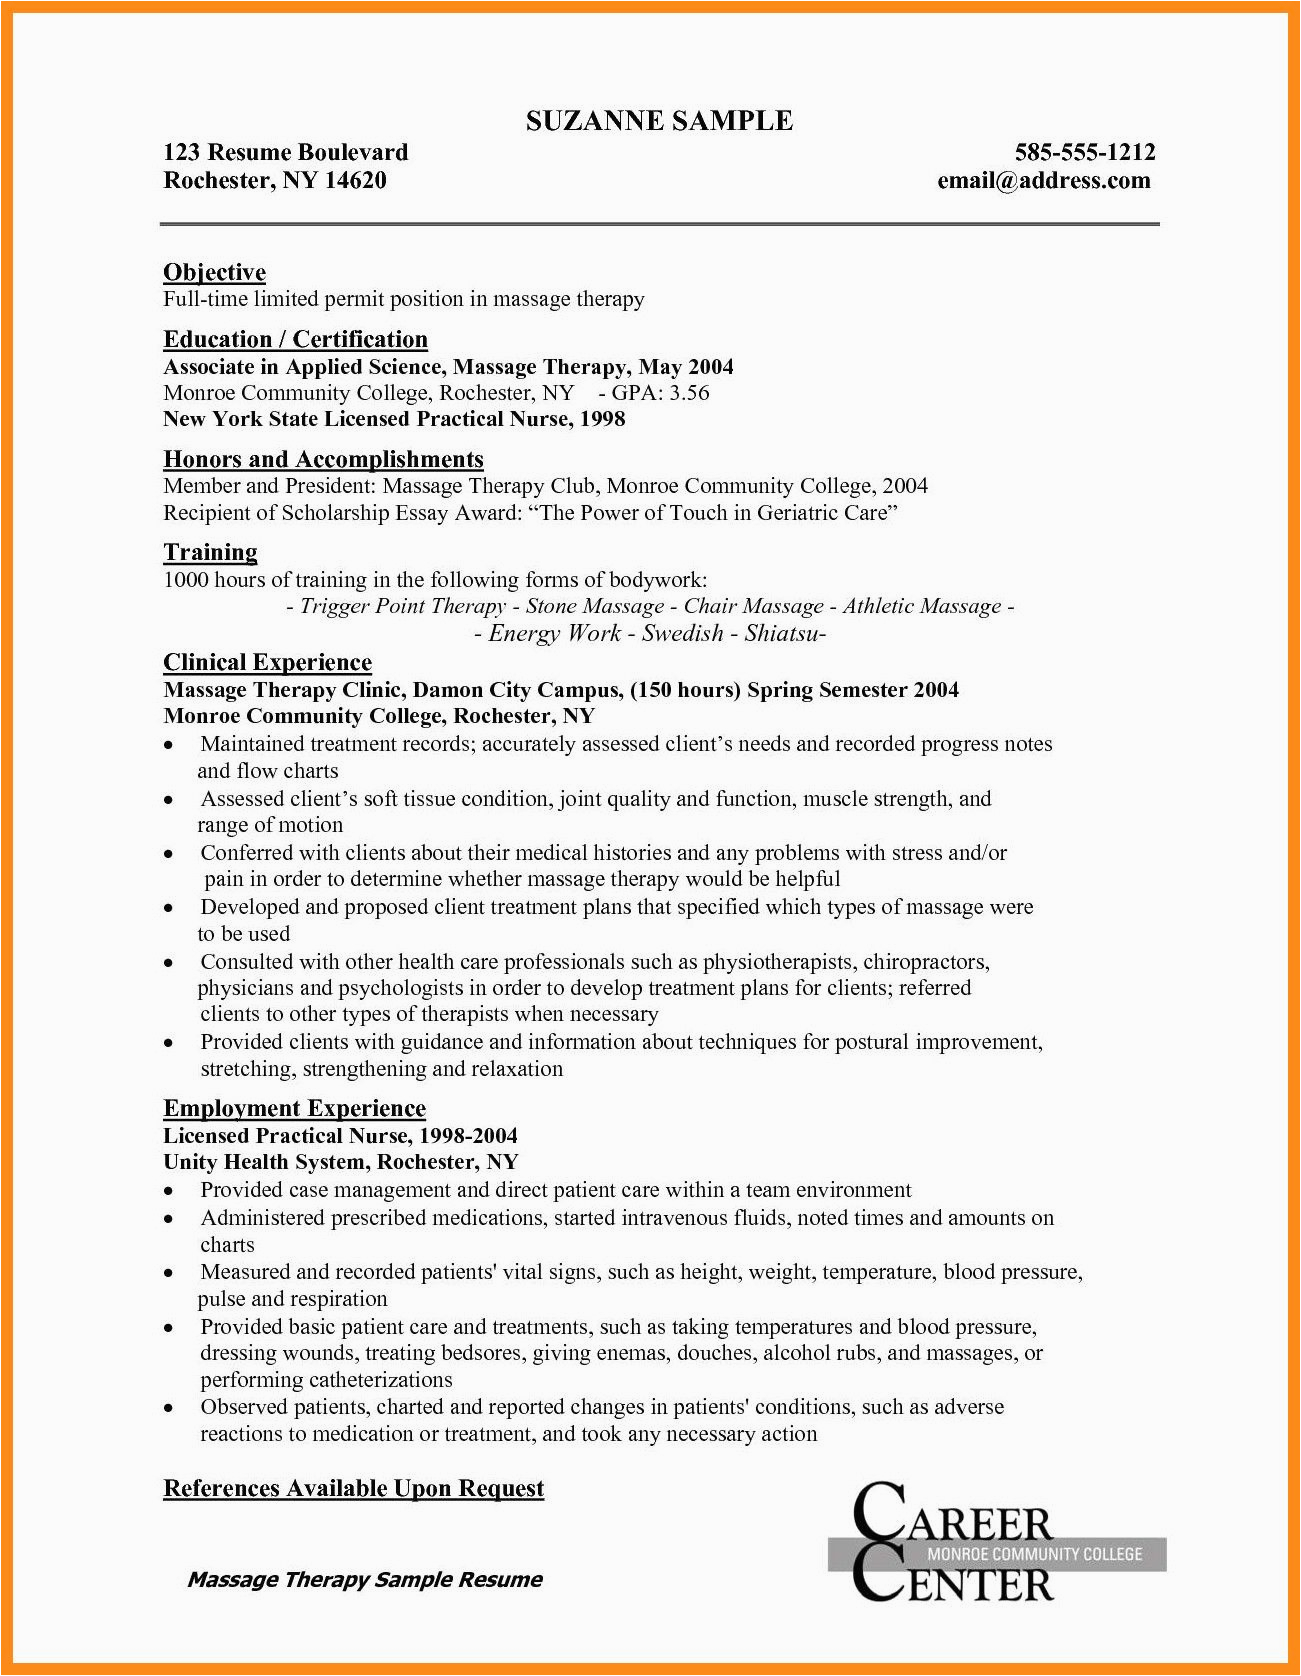 Labor and Delivery Rn Resume Sample Labor and Delivery Nurse Resume Labor and Delivery